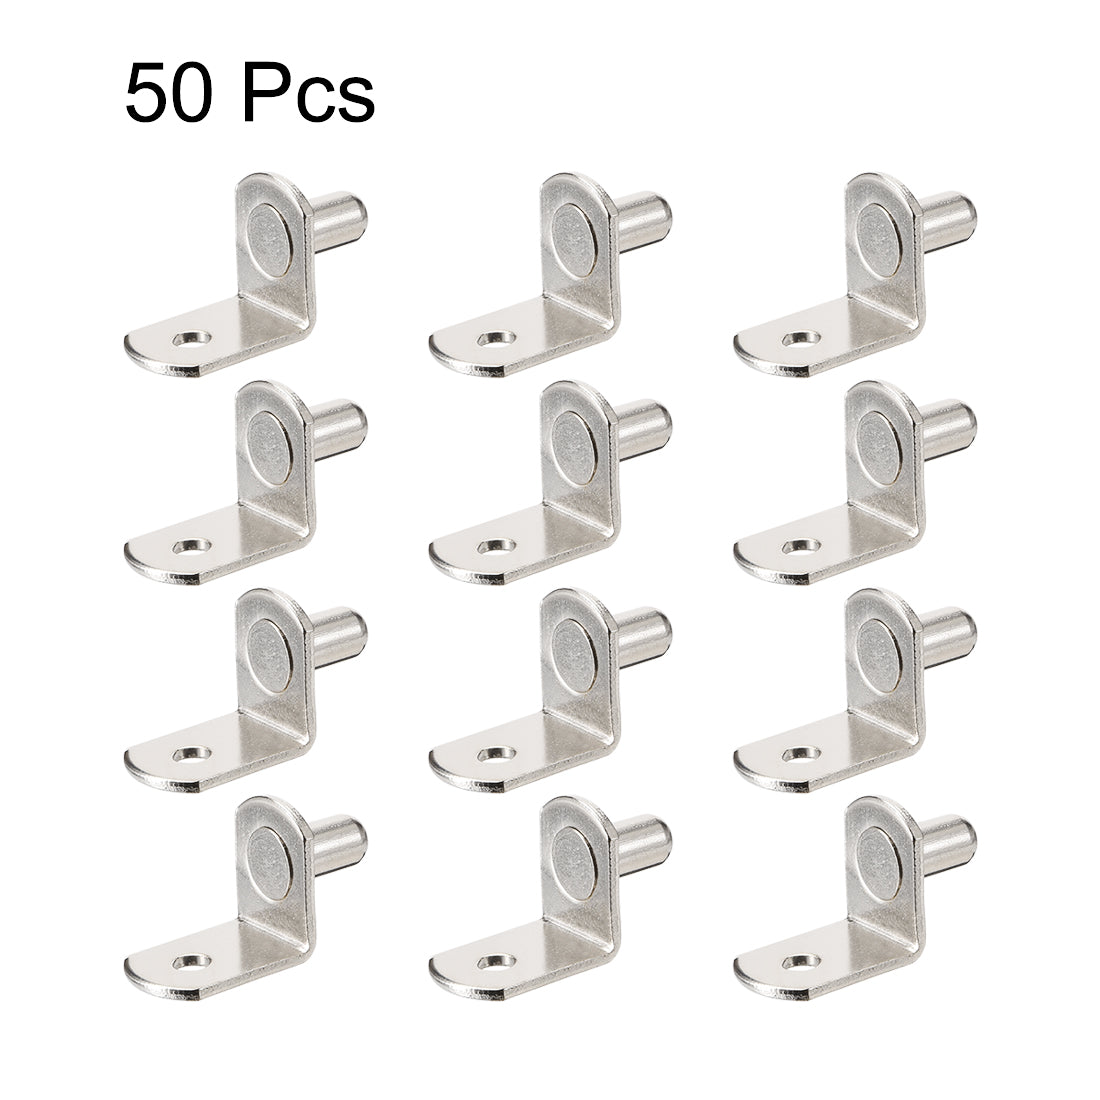 uxcell Uxcell Shelf Support Peg,6mm L-Shaped Support, Furniture Cabinet Closet Shelf,Bracket Pegs with Hole,for Kitchen Furniture Book Shelves Supplies,50pcs